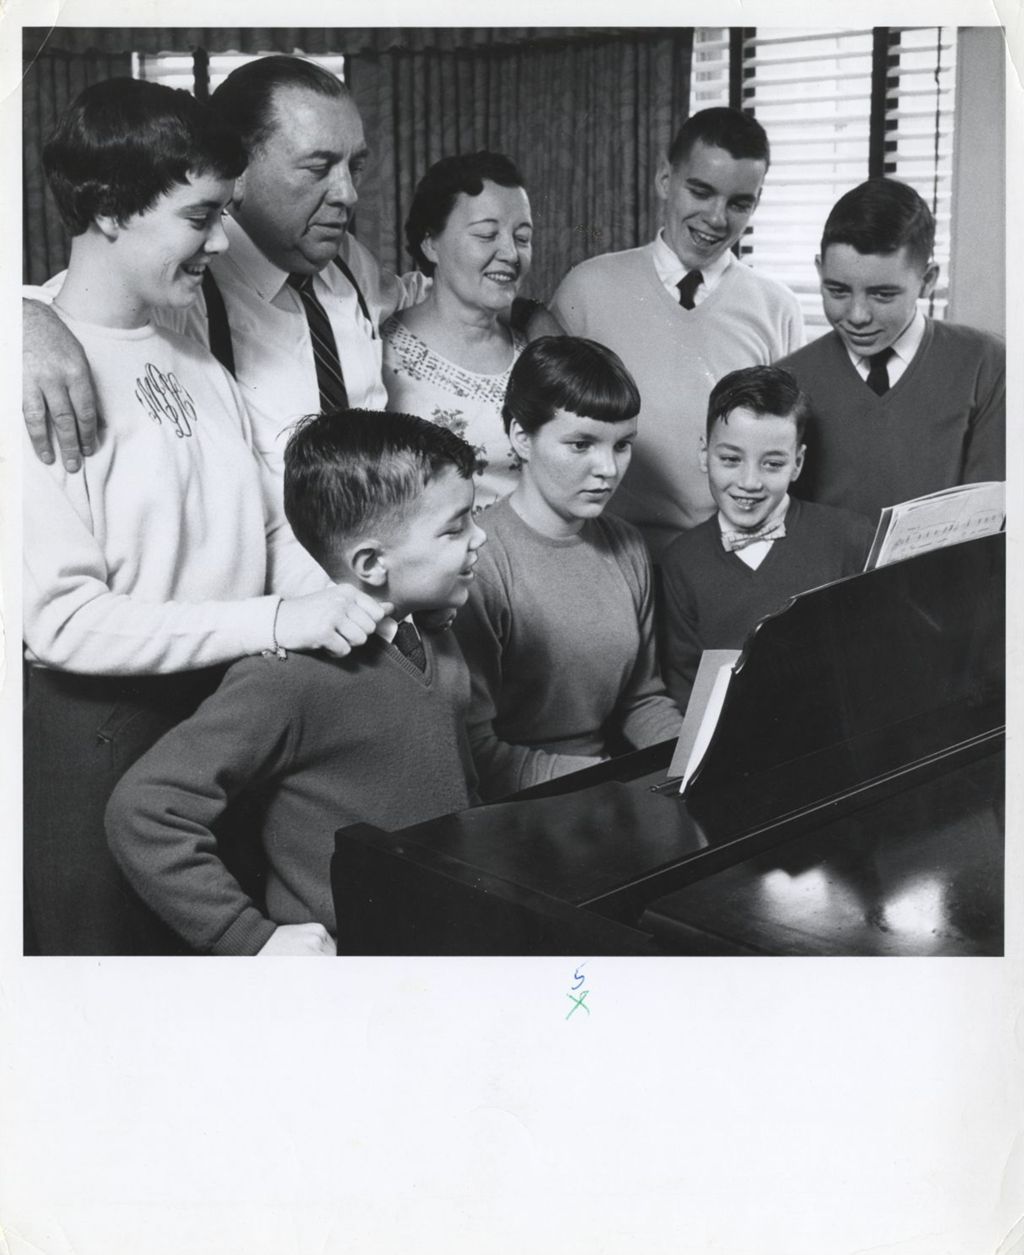 Miniature of Eleanor and Richard J. Daley with their children around the piano